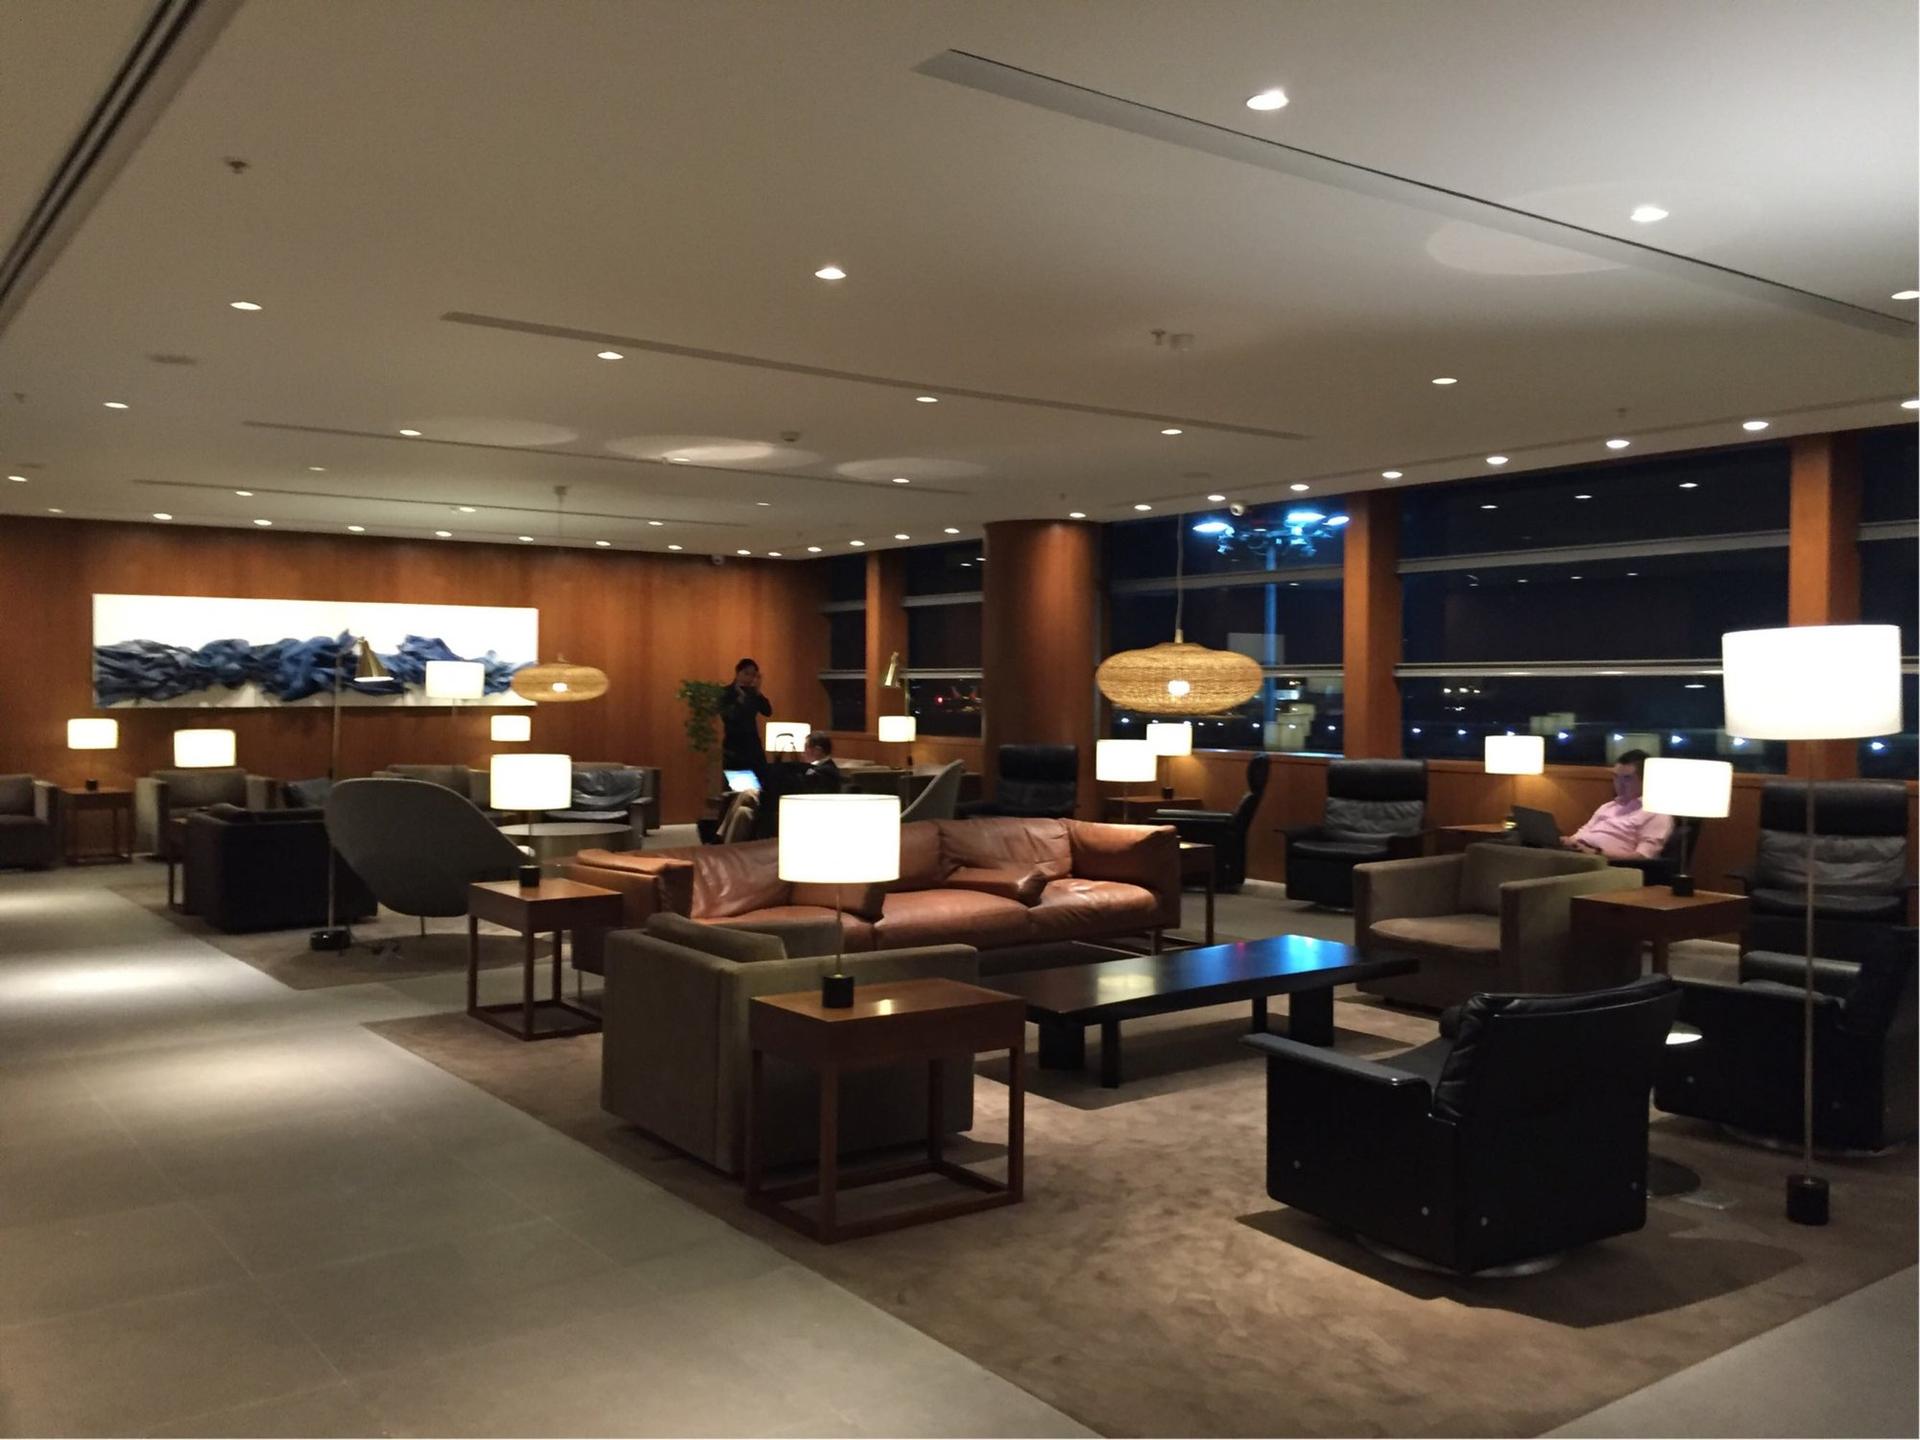 Cathay Pacific First and Business Class Lounge image 12 of 19